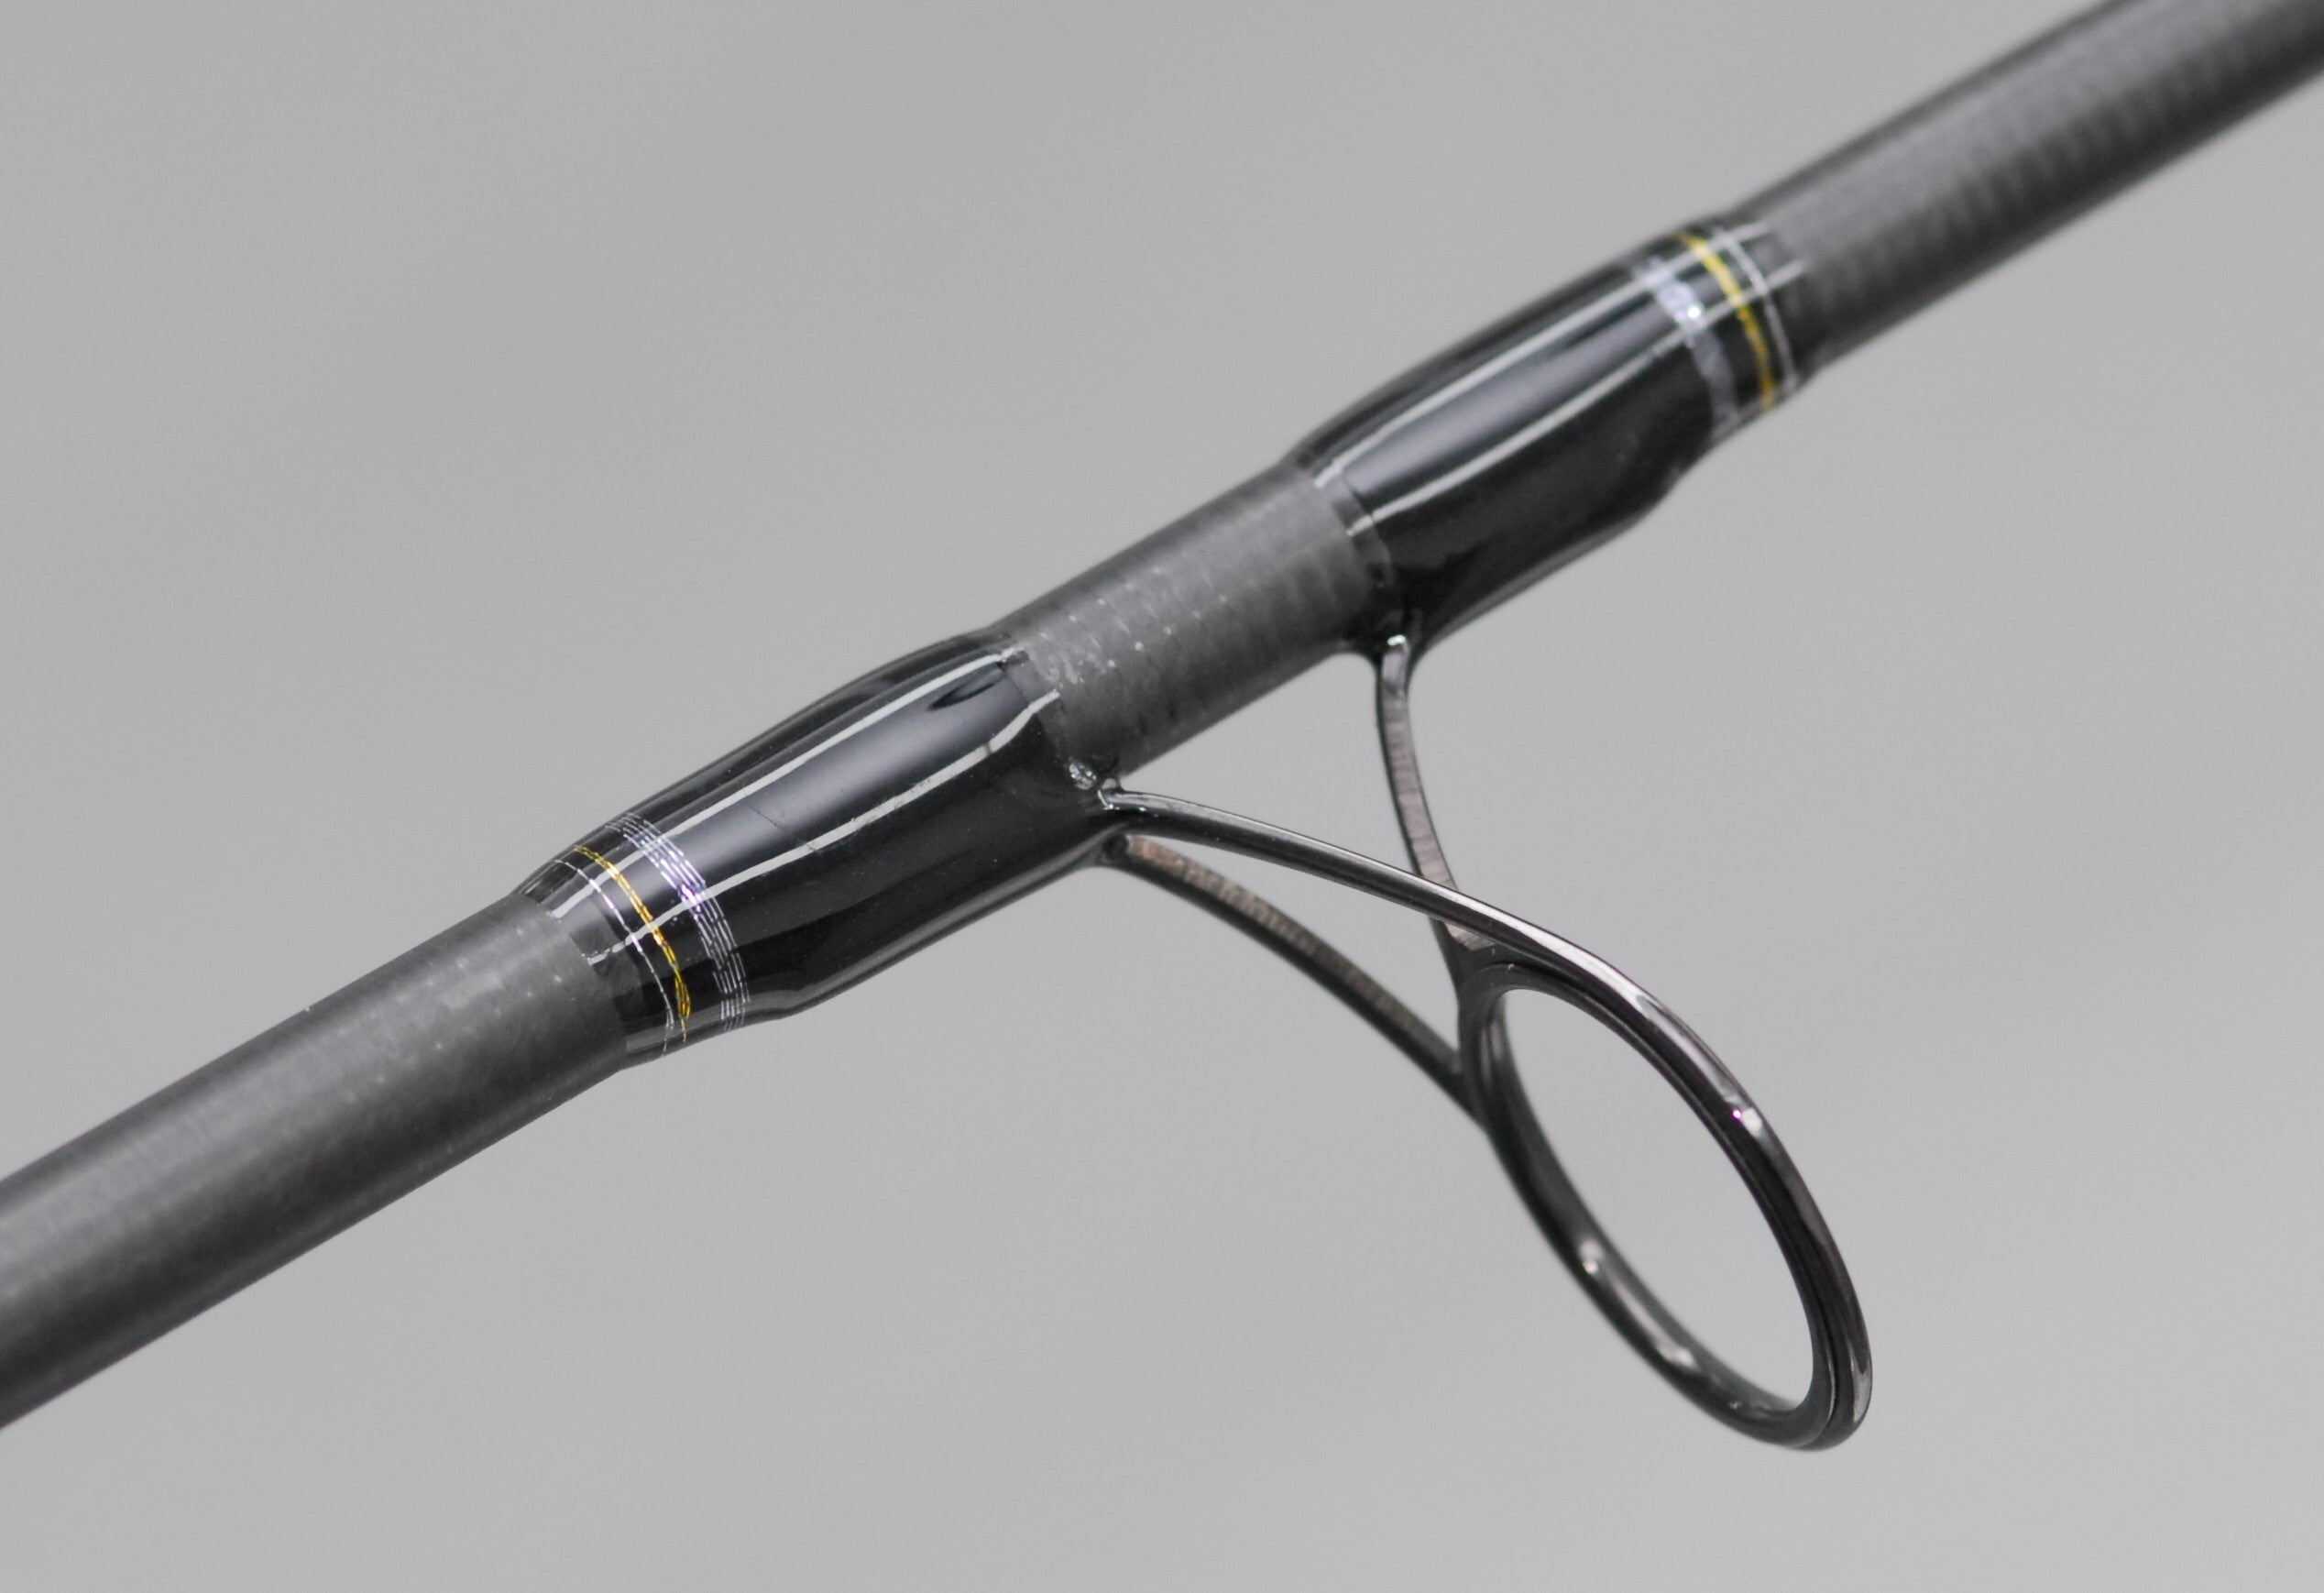 Miller Rods Drifter Pack L604 Spin Rod -  - Mansfield Hunting & Fishing - Products to prepare for Corona Virus